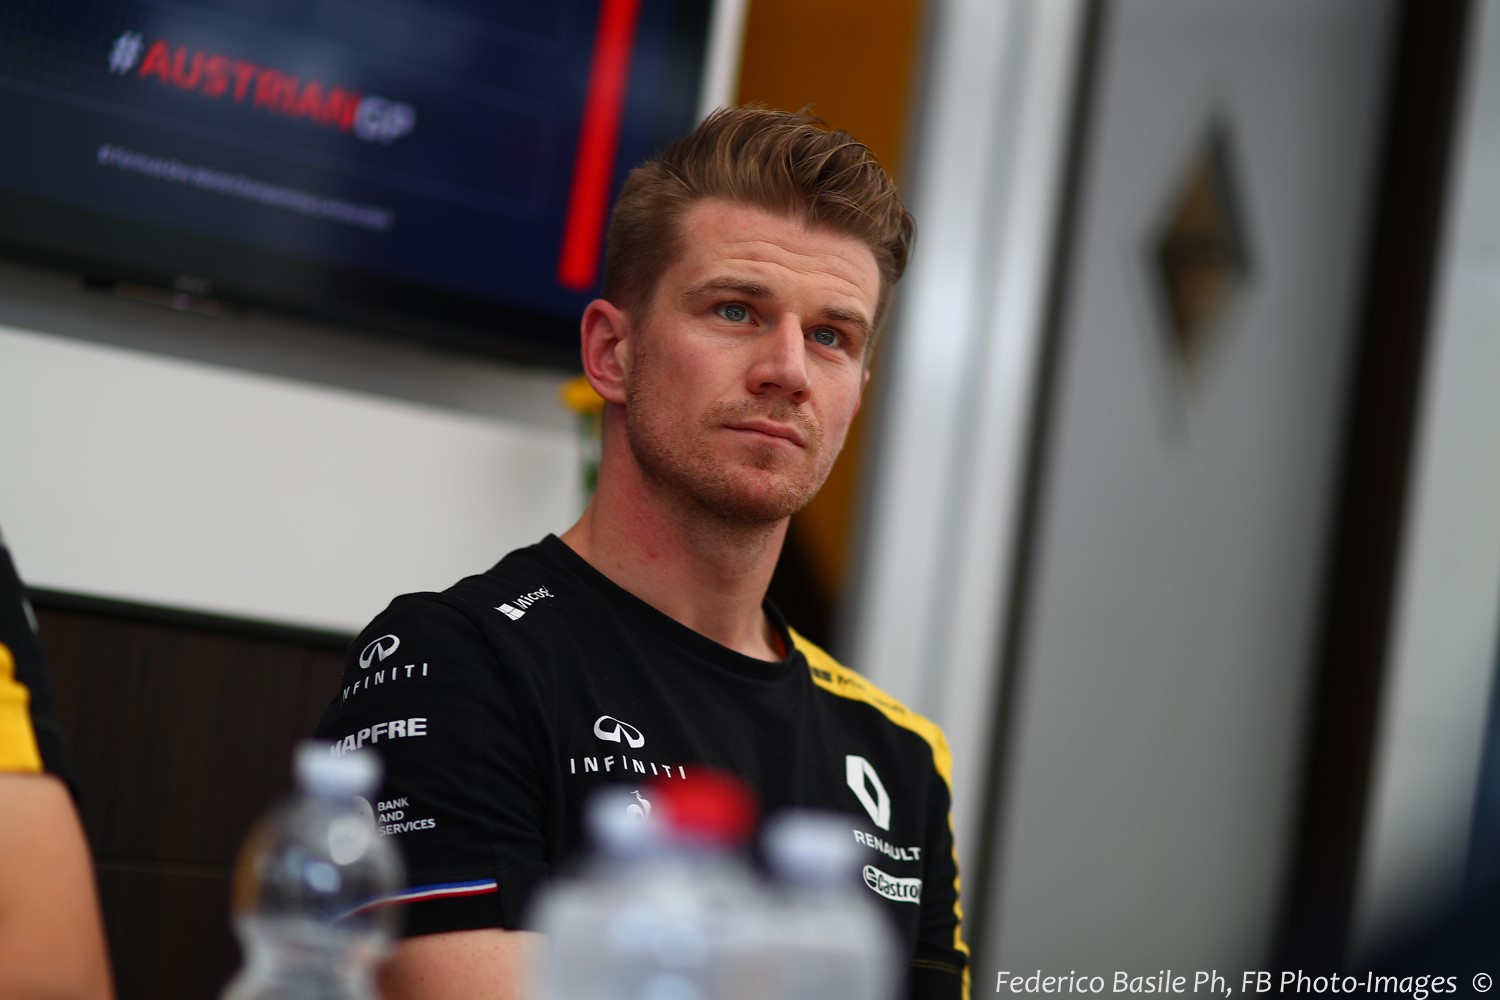 Unable to secure an IndyCar deal, Hulkenberg will tend to his garden in 2020